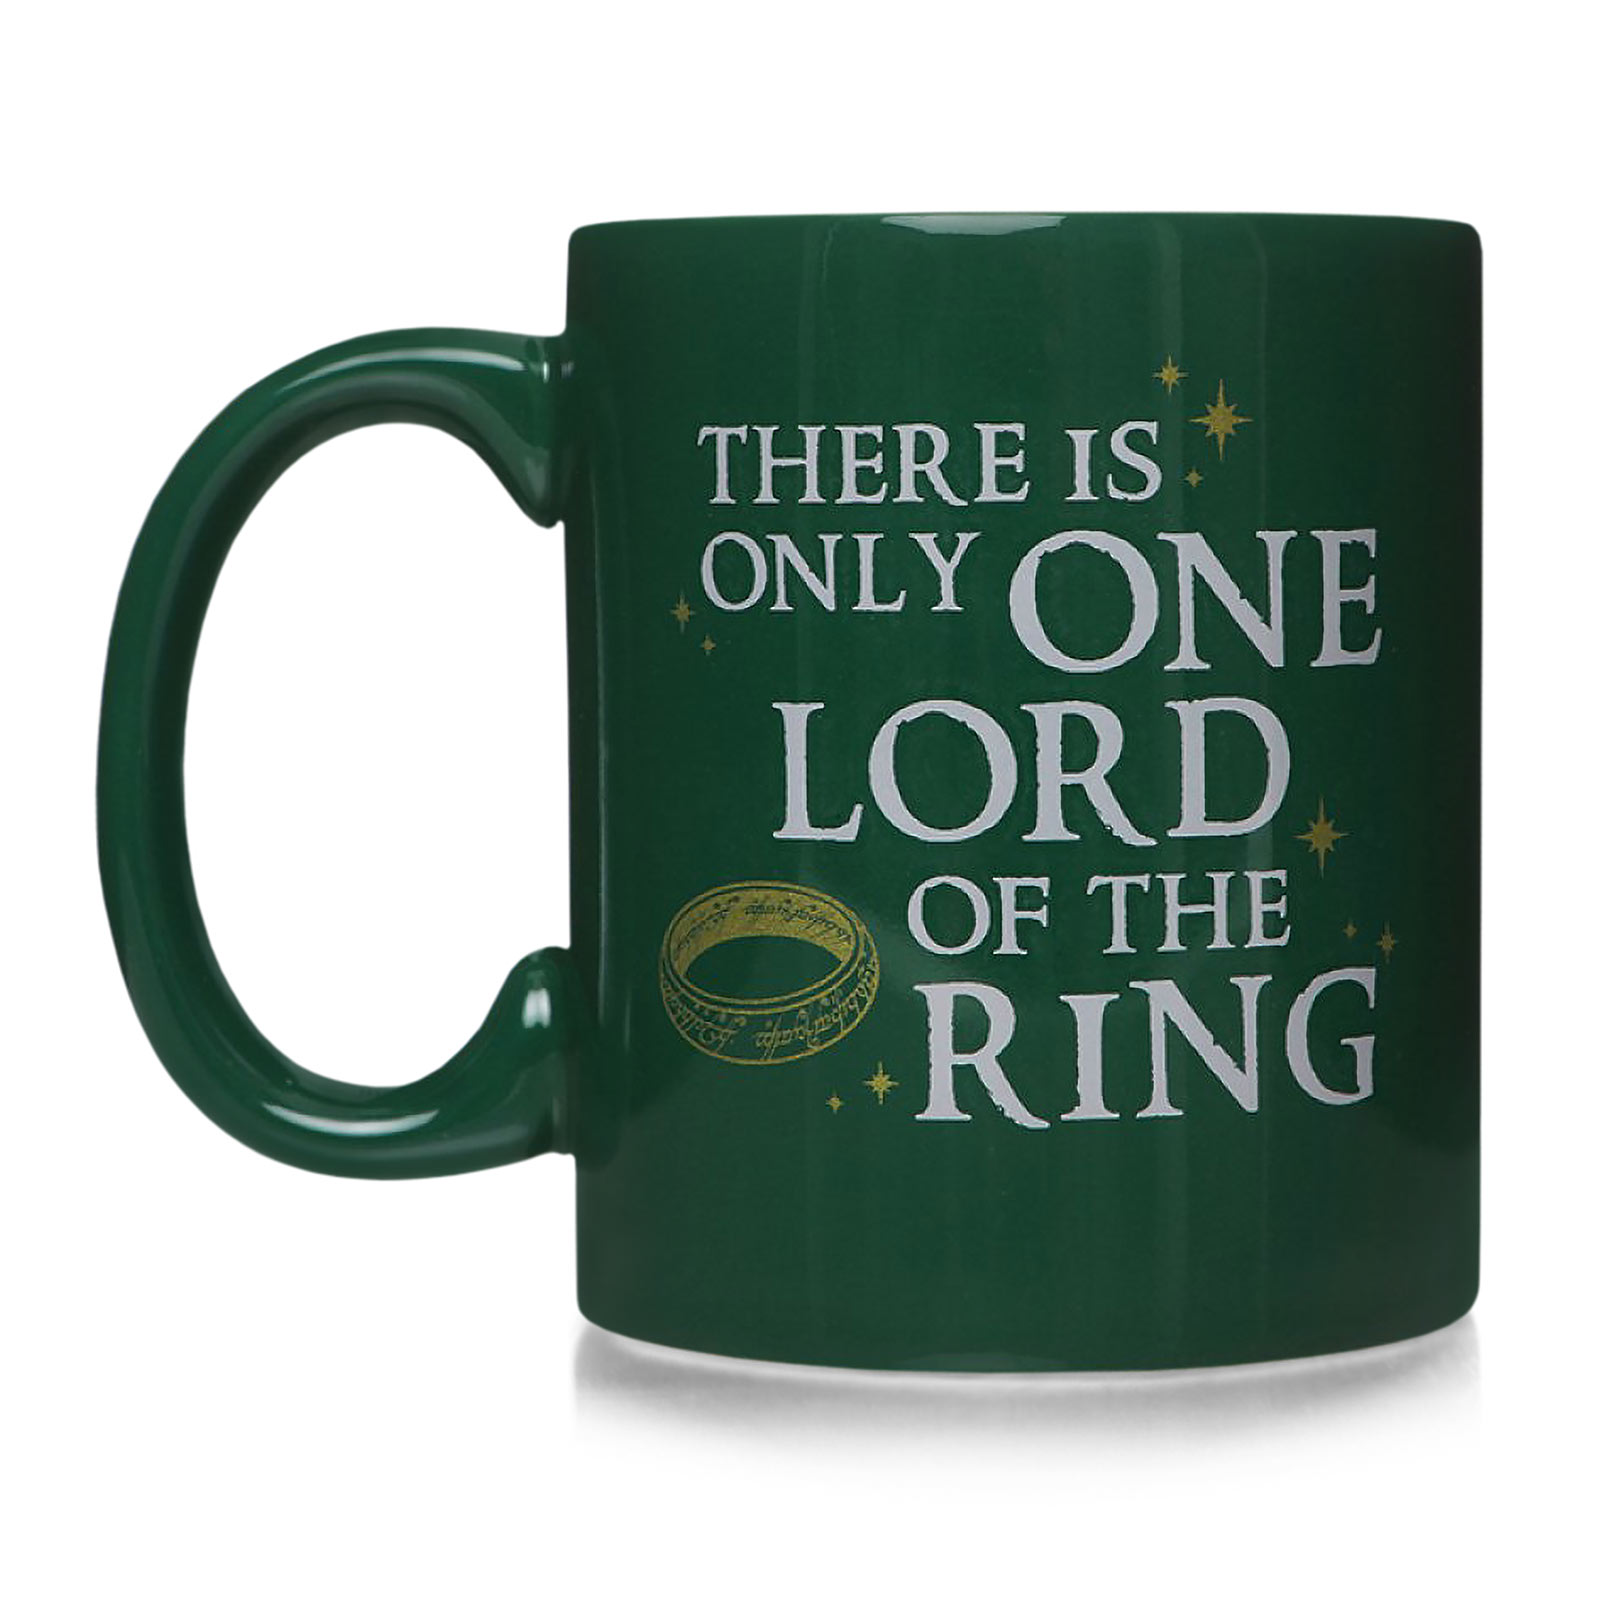 Lord of the Rings - Only One Lord of the Ring Mug